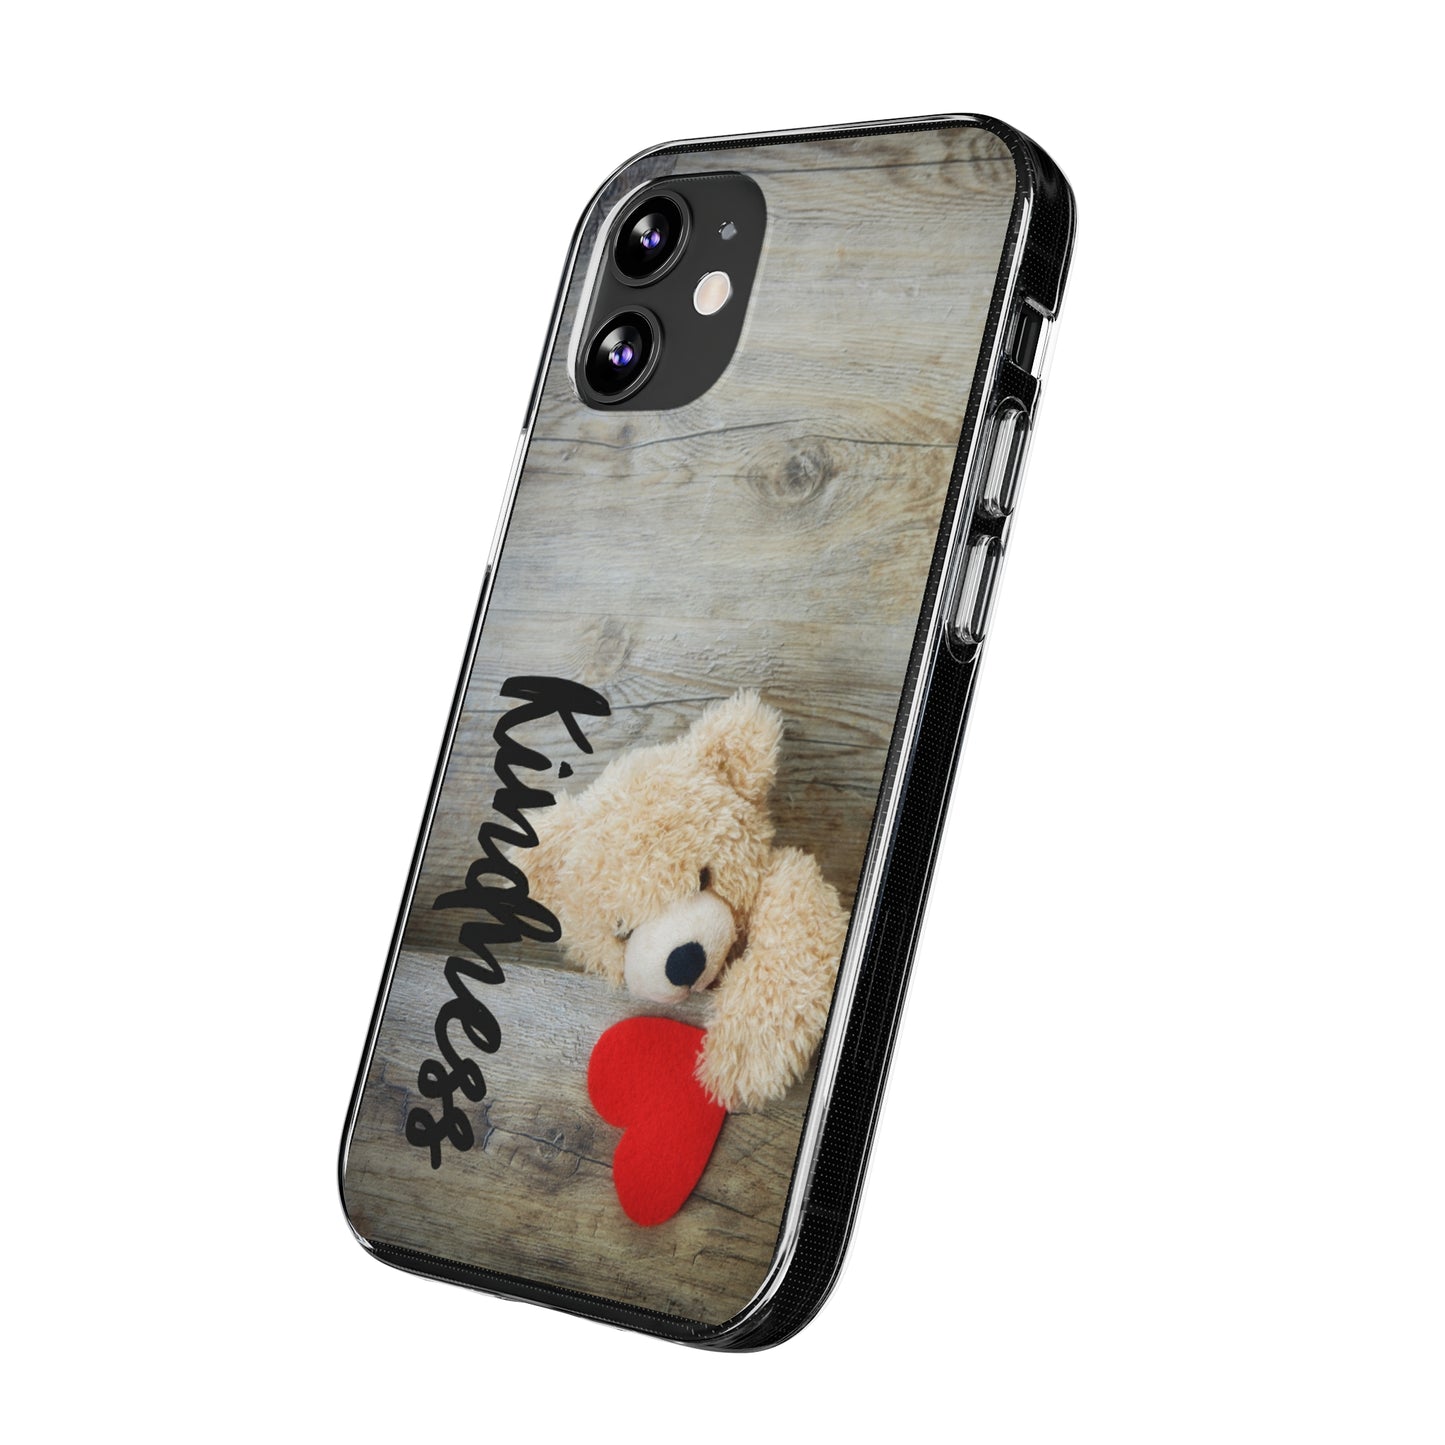 Kindness - iPhone Case - FREE SHIPPING